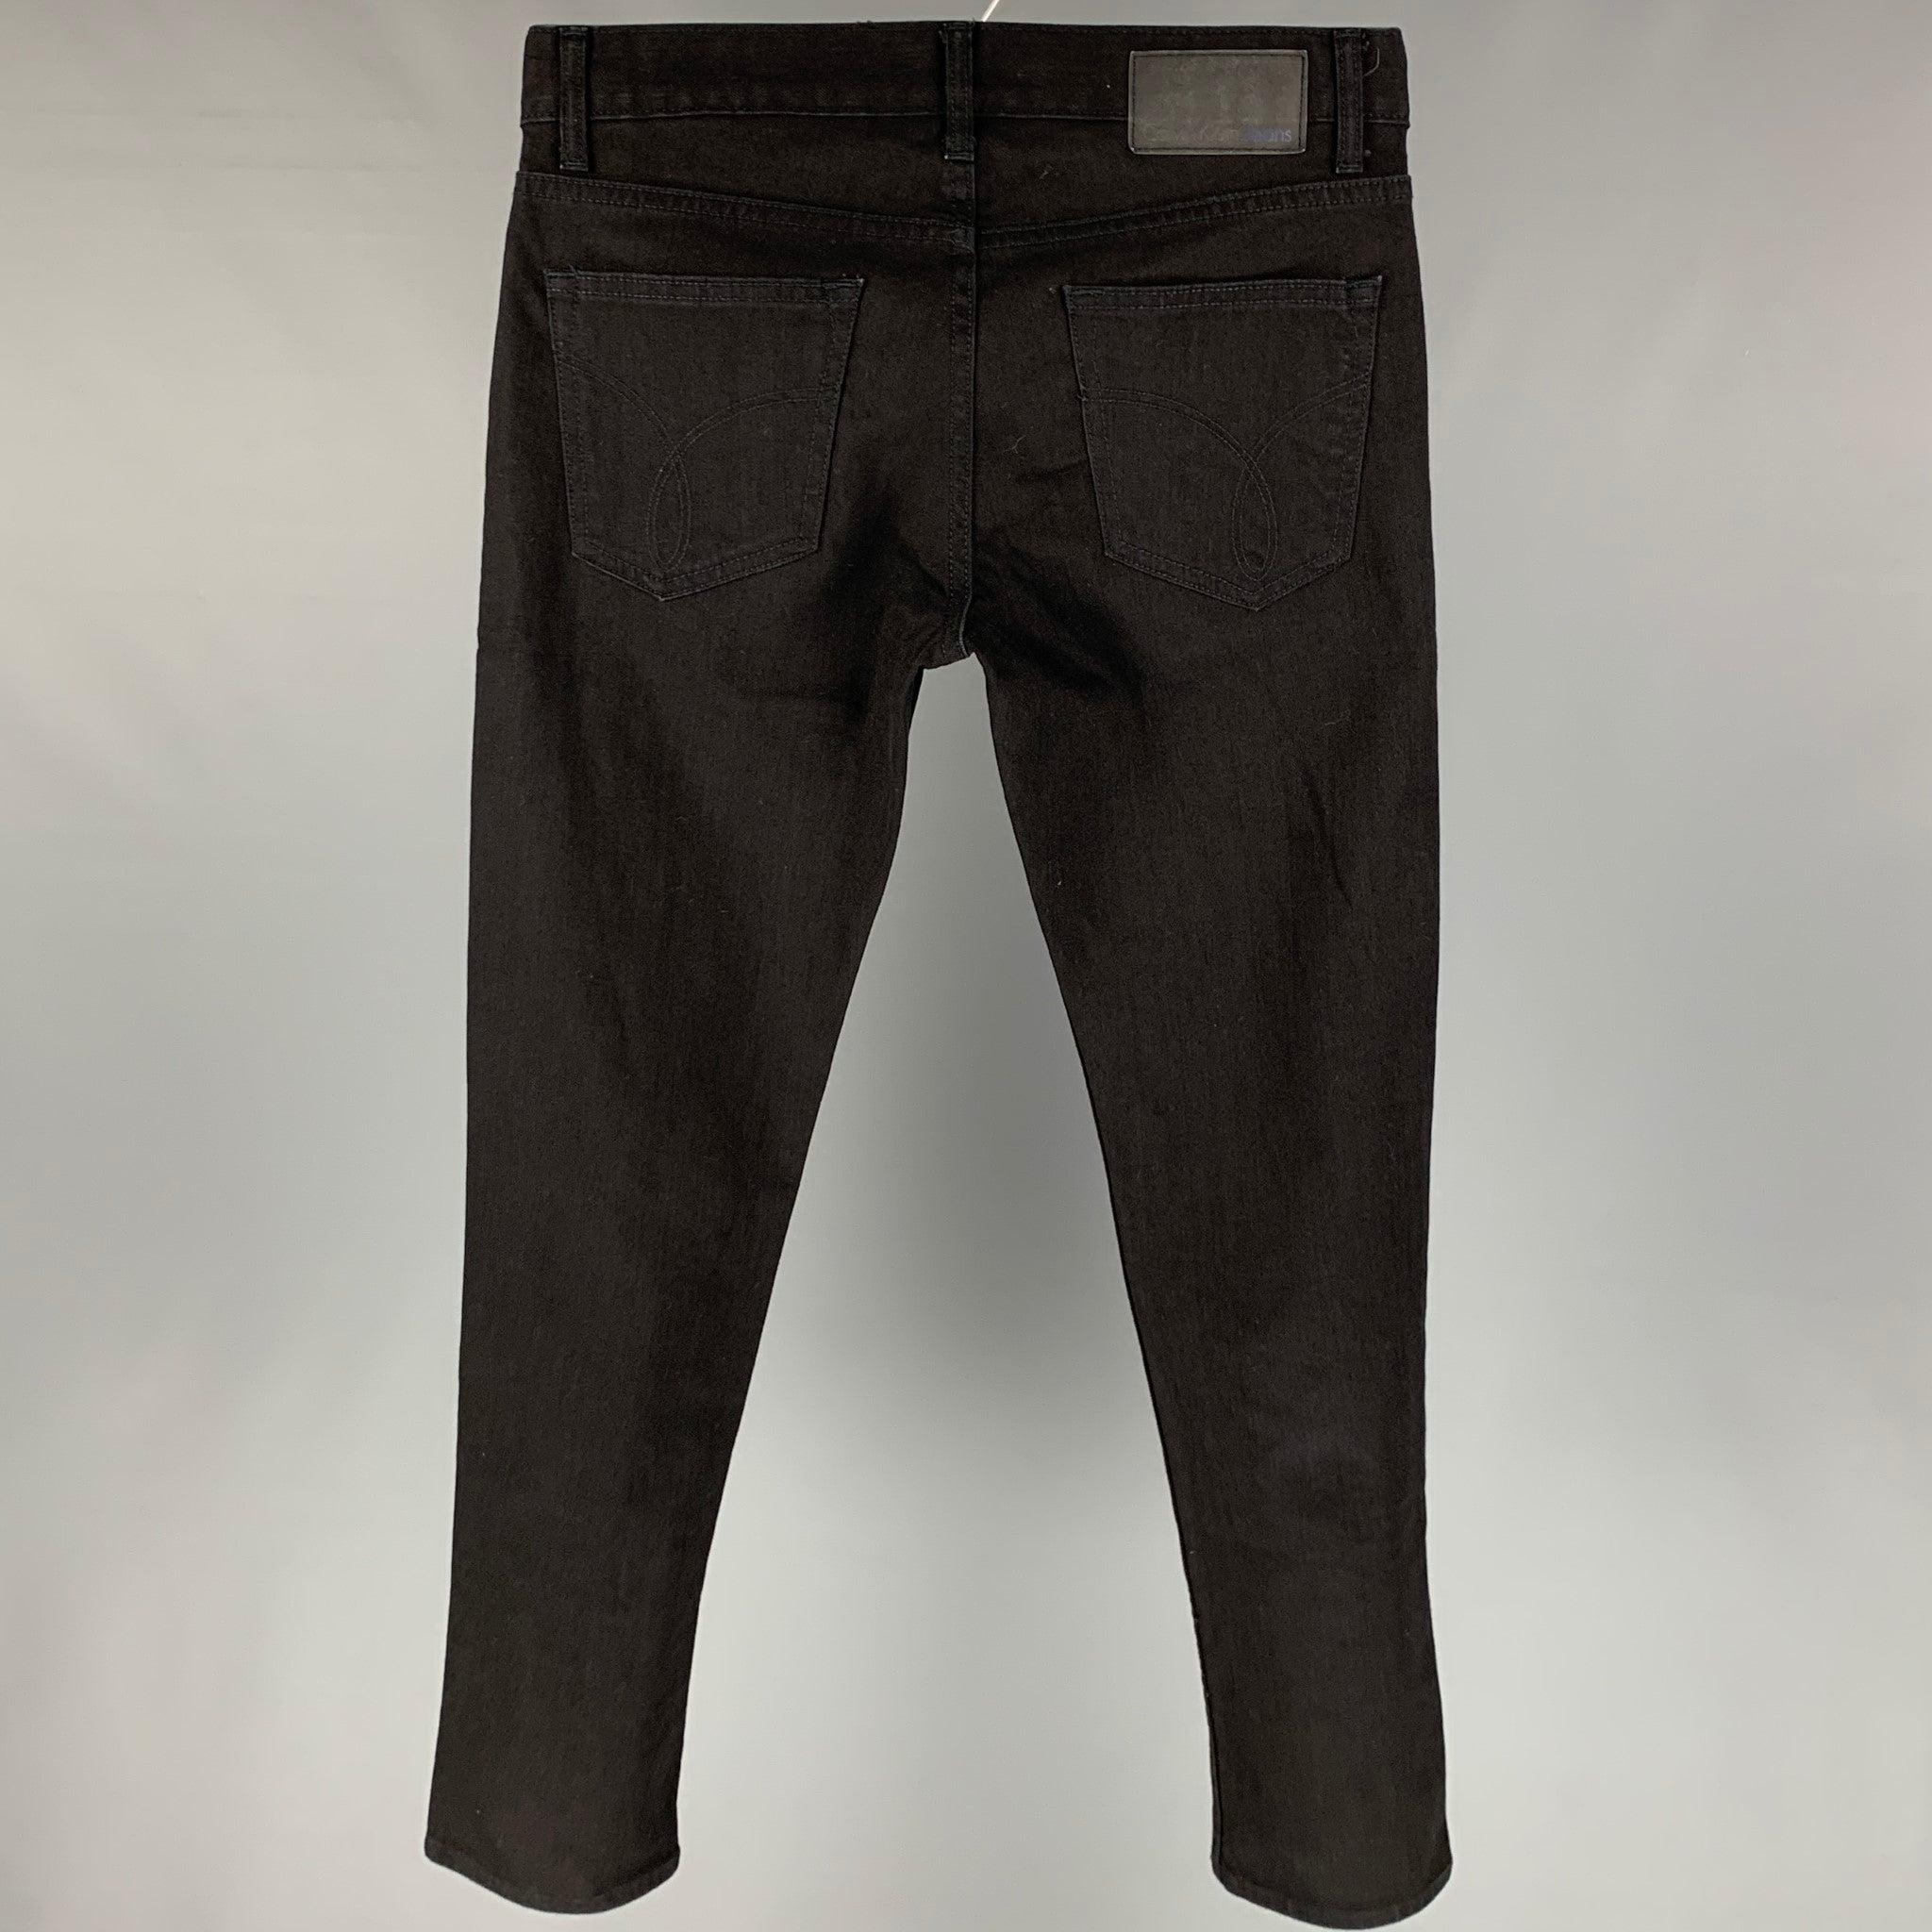 CALVIN KLEIN jeans comes in a black cotton featuring a slim fit and a zip fly closure.
Very Good
Pre-Owned Condition. 

Marked:   31x30 

Measurements: 
  Waist: 31 inches  Rise: 10 inches  Inseam: 31 inches 
  
  
 
Reference: 114102
Category: